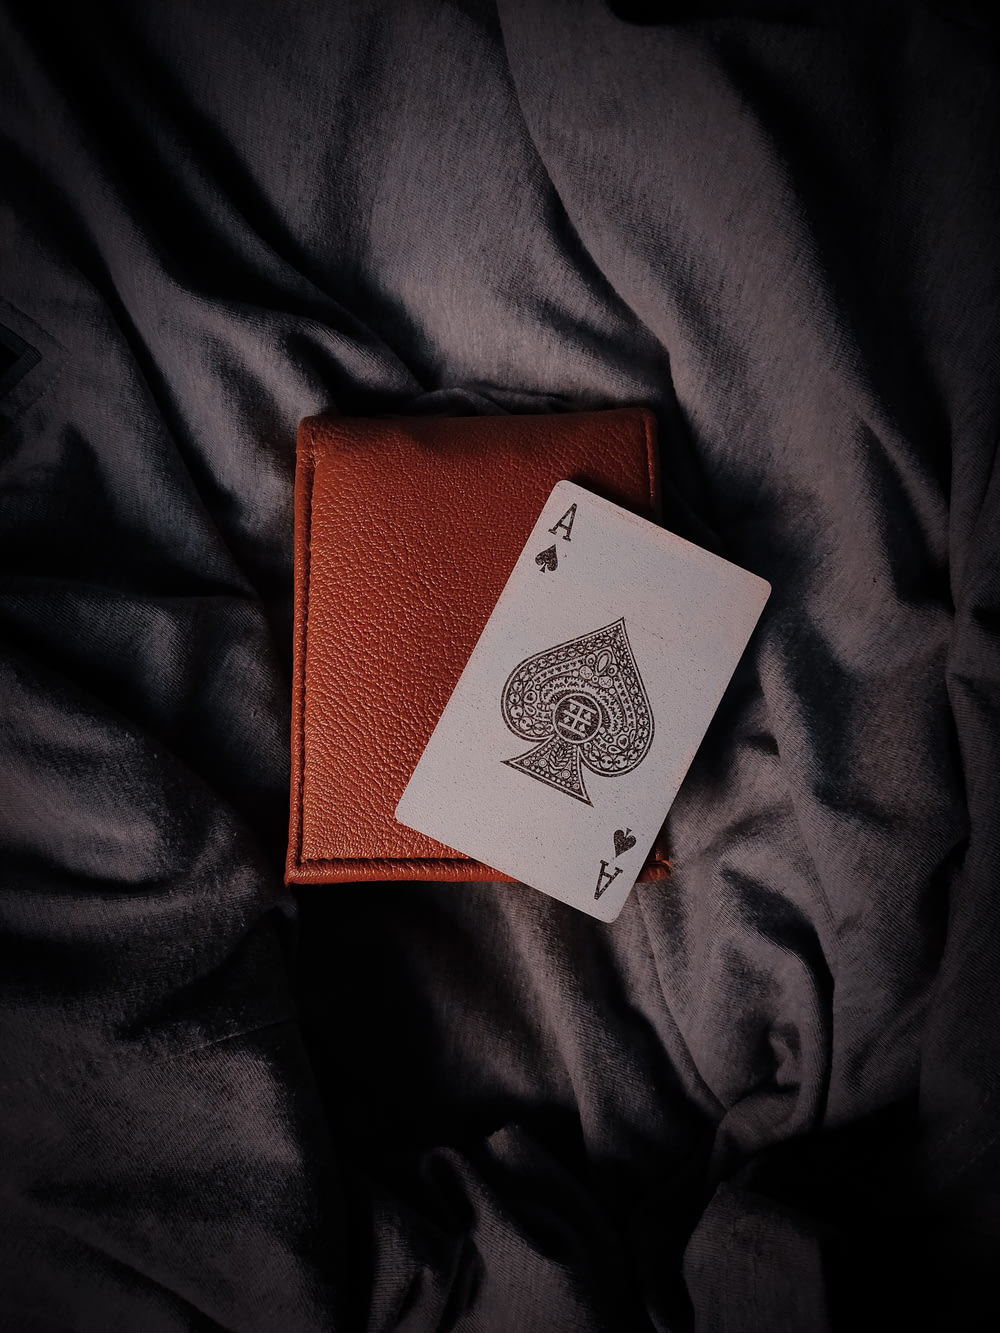 ace of spade playing card on brown leather wallet